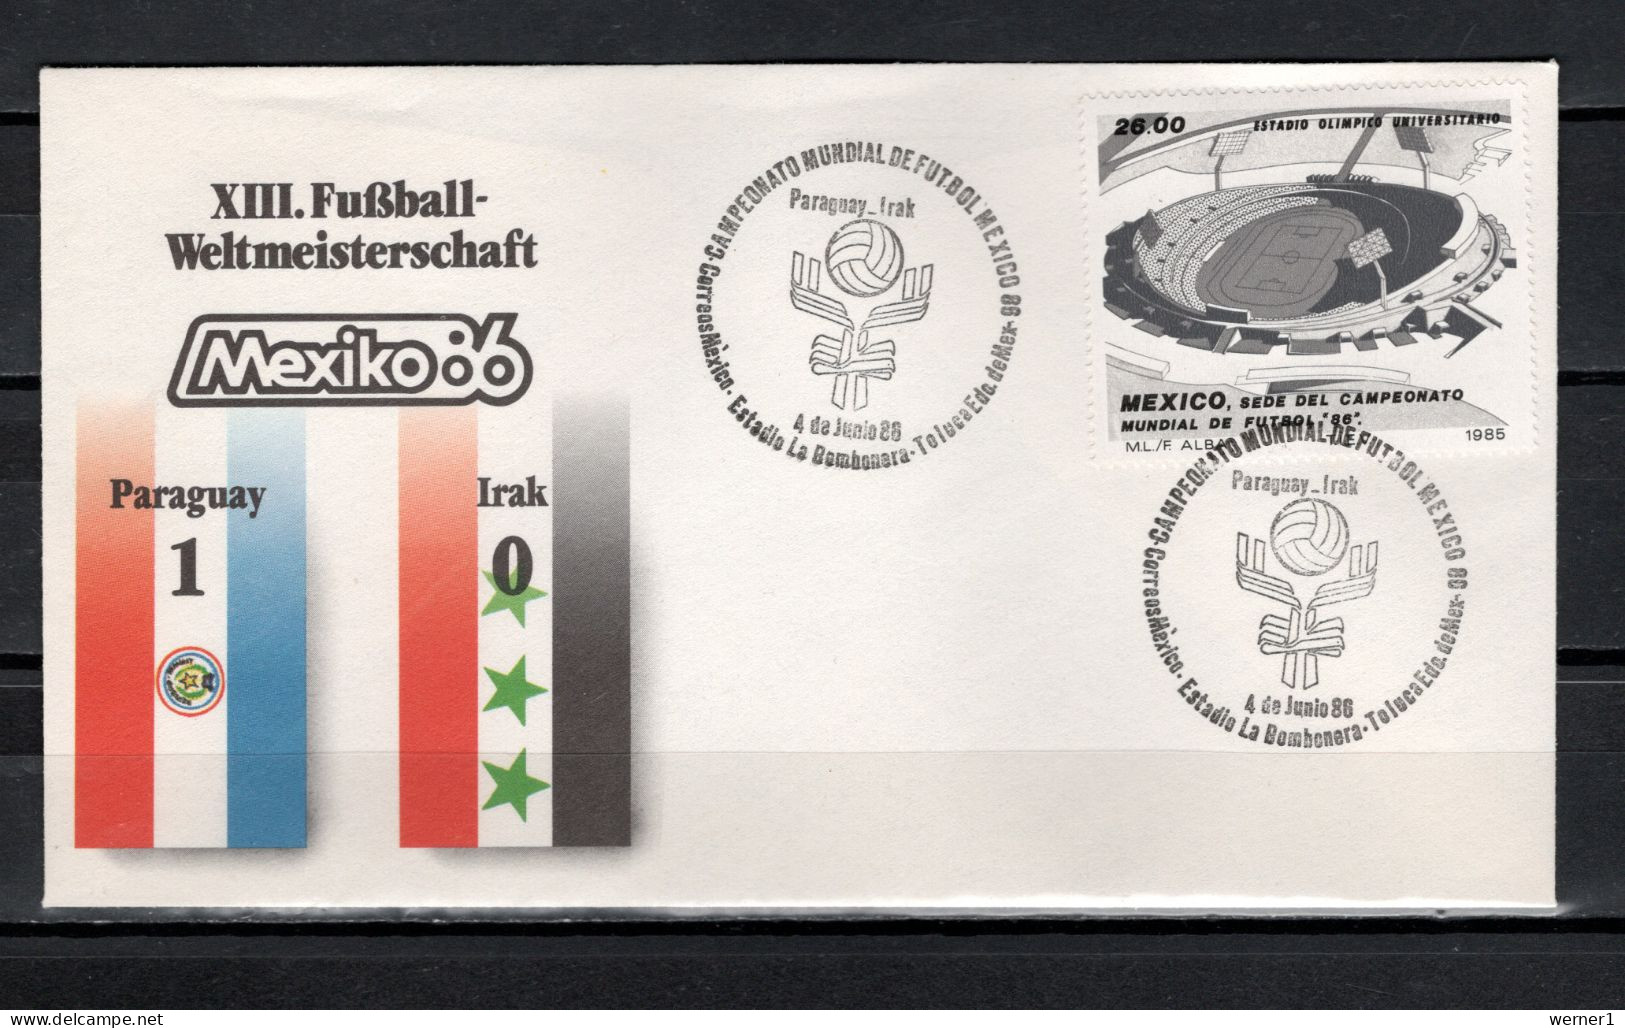 Mexico 1986 Football Soccer World Cup Commemorative Cover Match Paraguay - Iraq 1 : 0 - 1986 – Mexiko